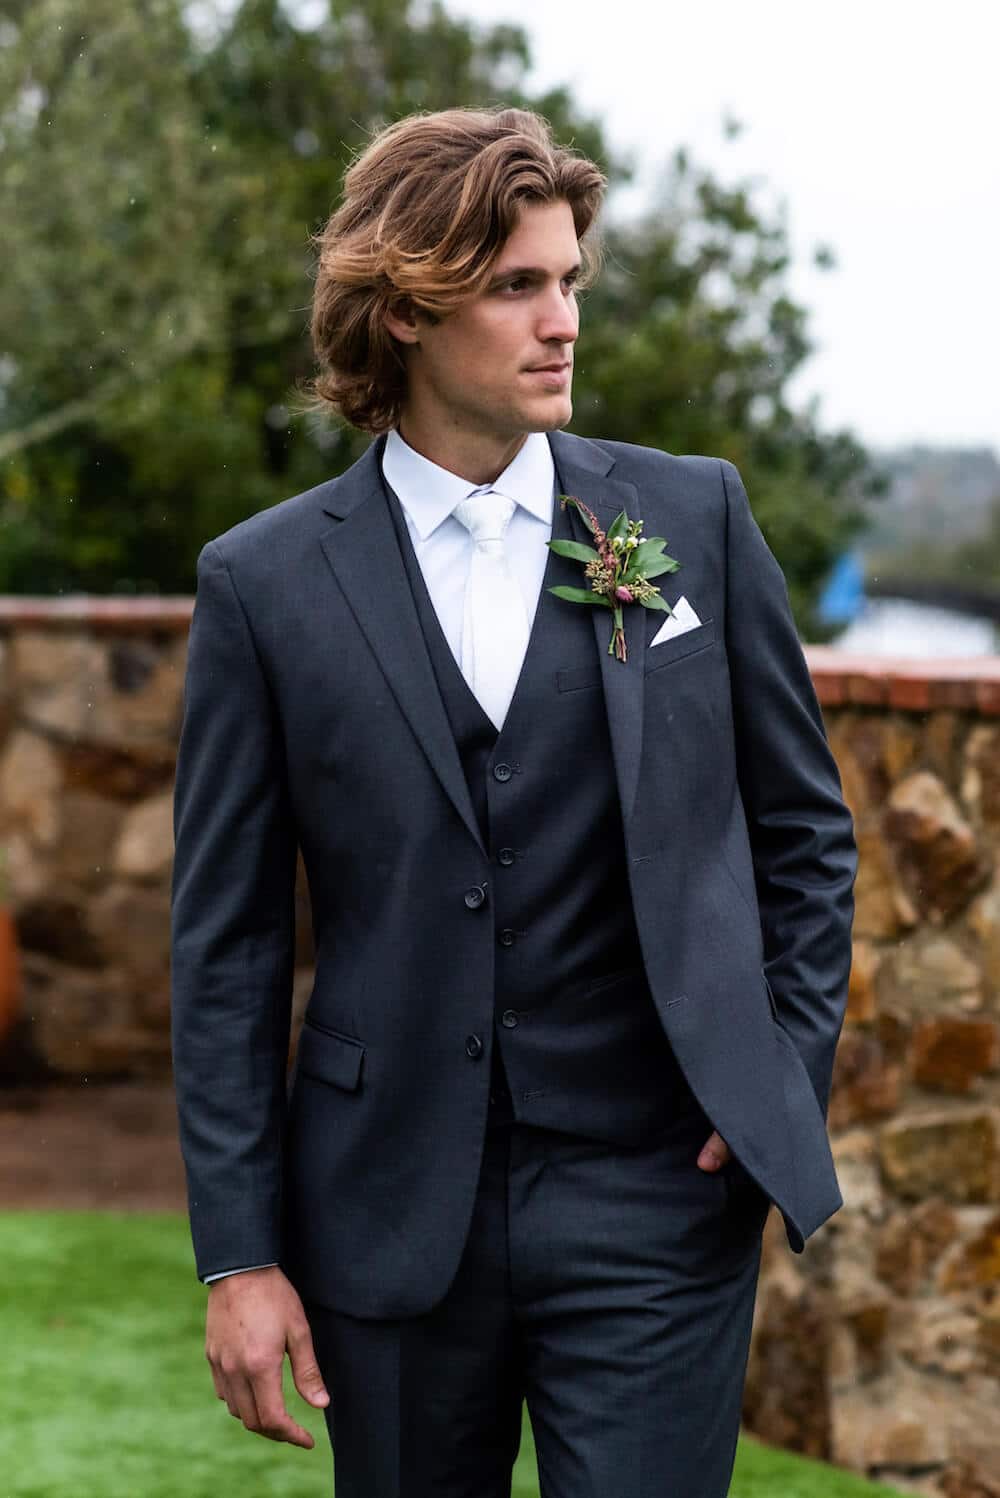 Young groom in Modern Groom attire with a scenic natural backdrop.